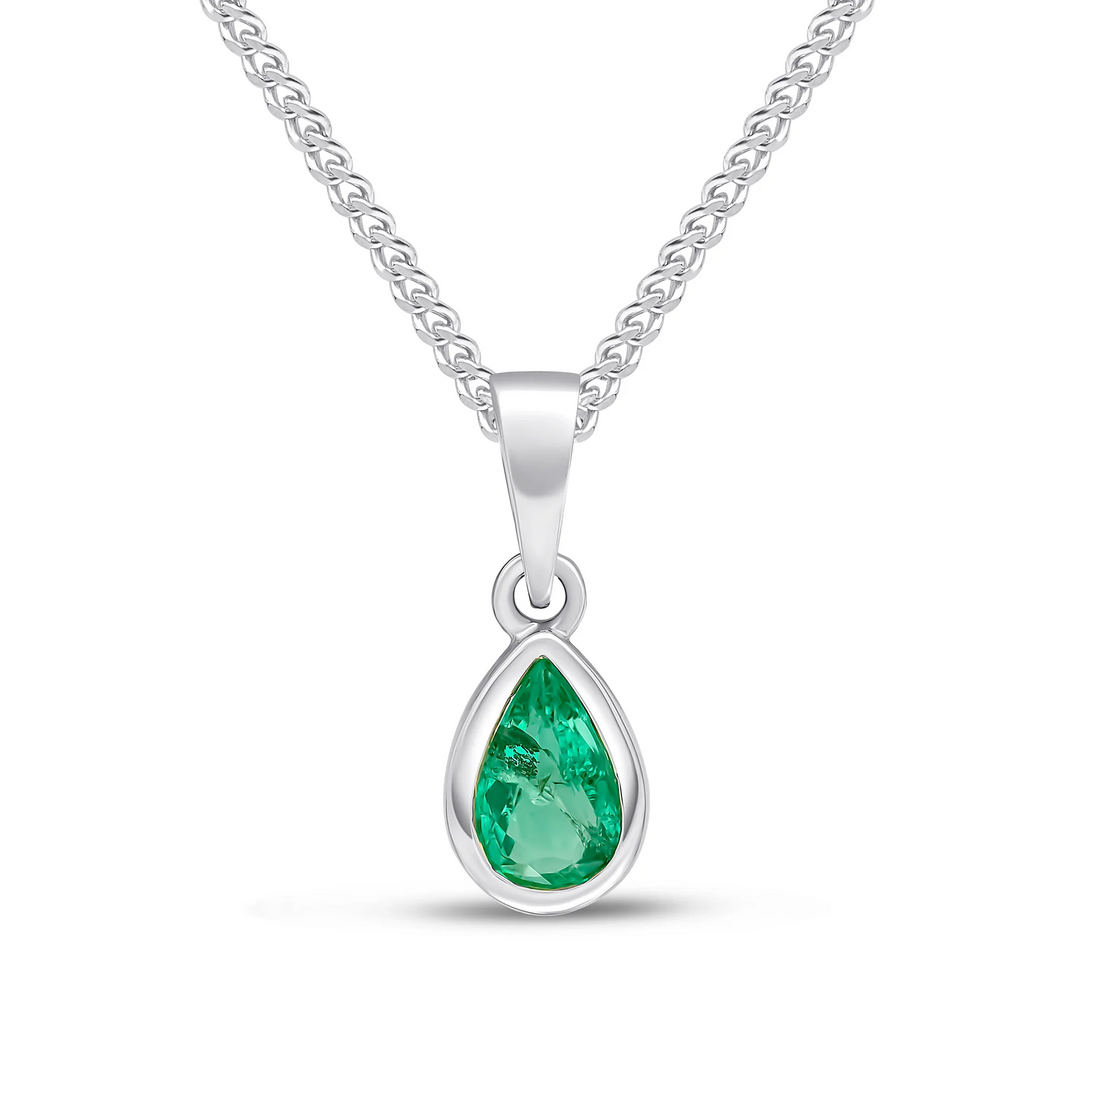 9CT Gold Pear Shaped Emerald Rubover Pendant (6x4mm)